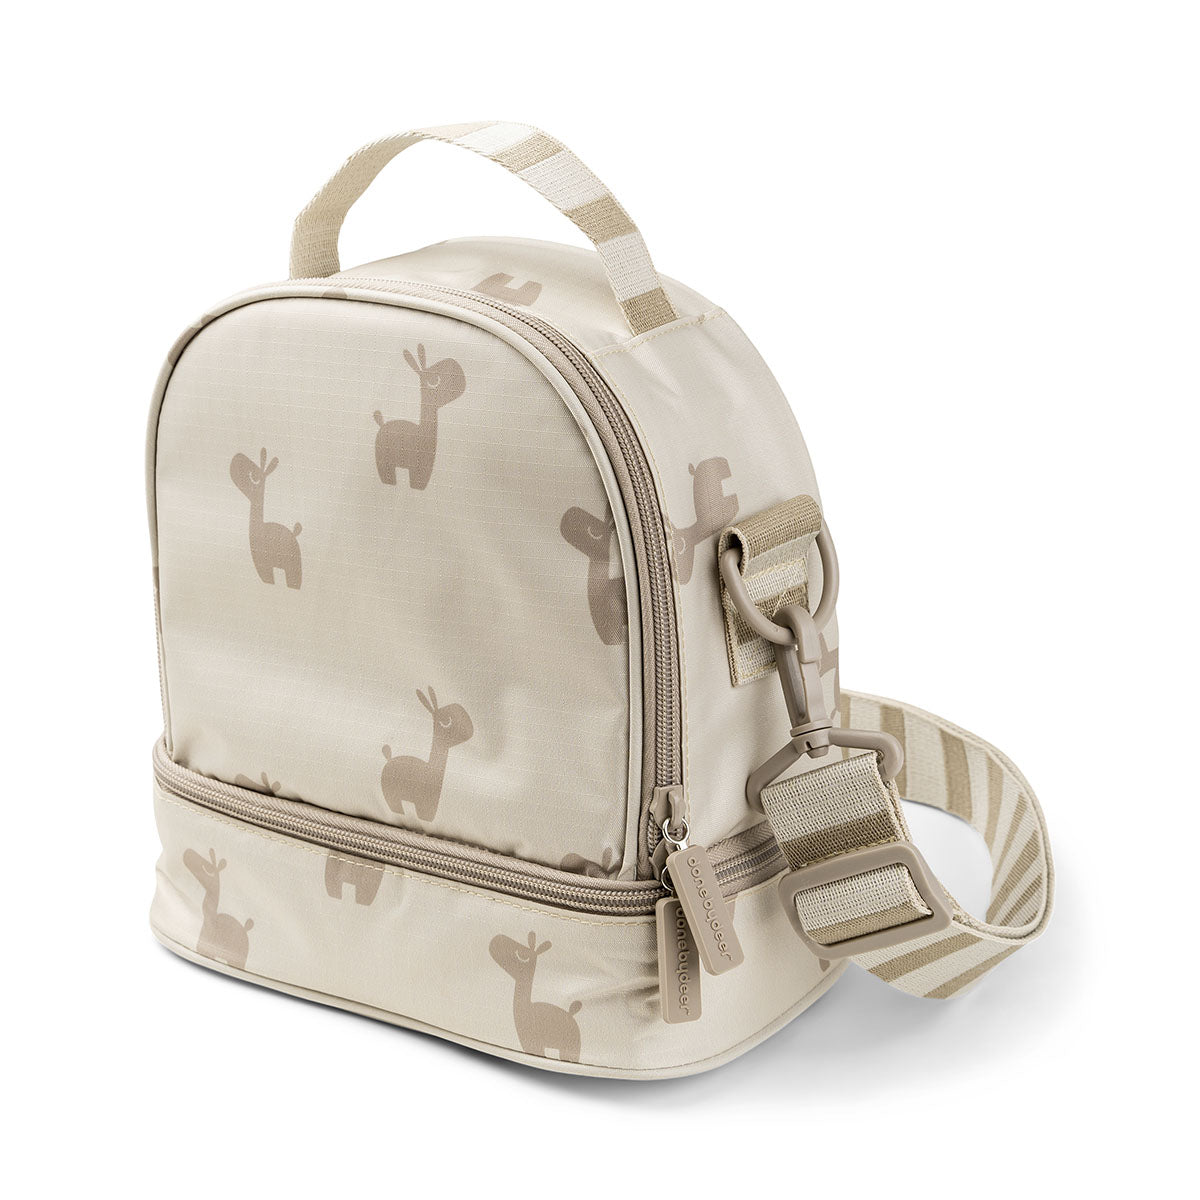 Kids insulated lunch bag - Lalee - Sand